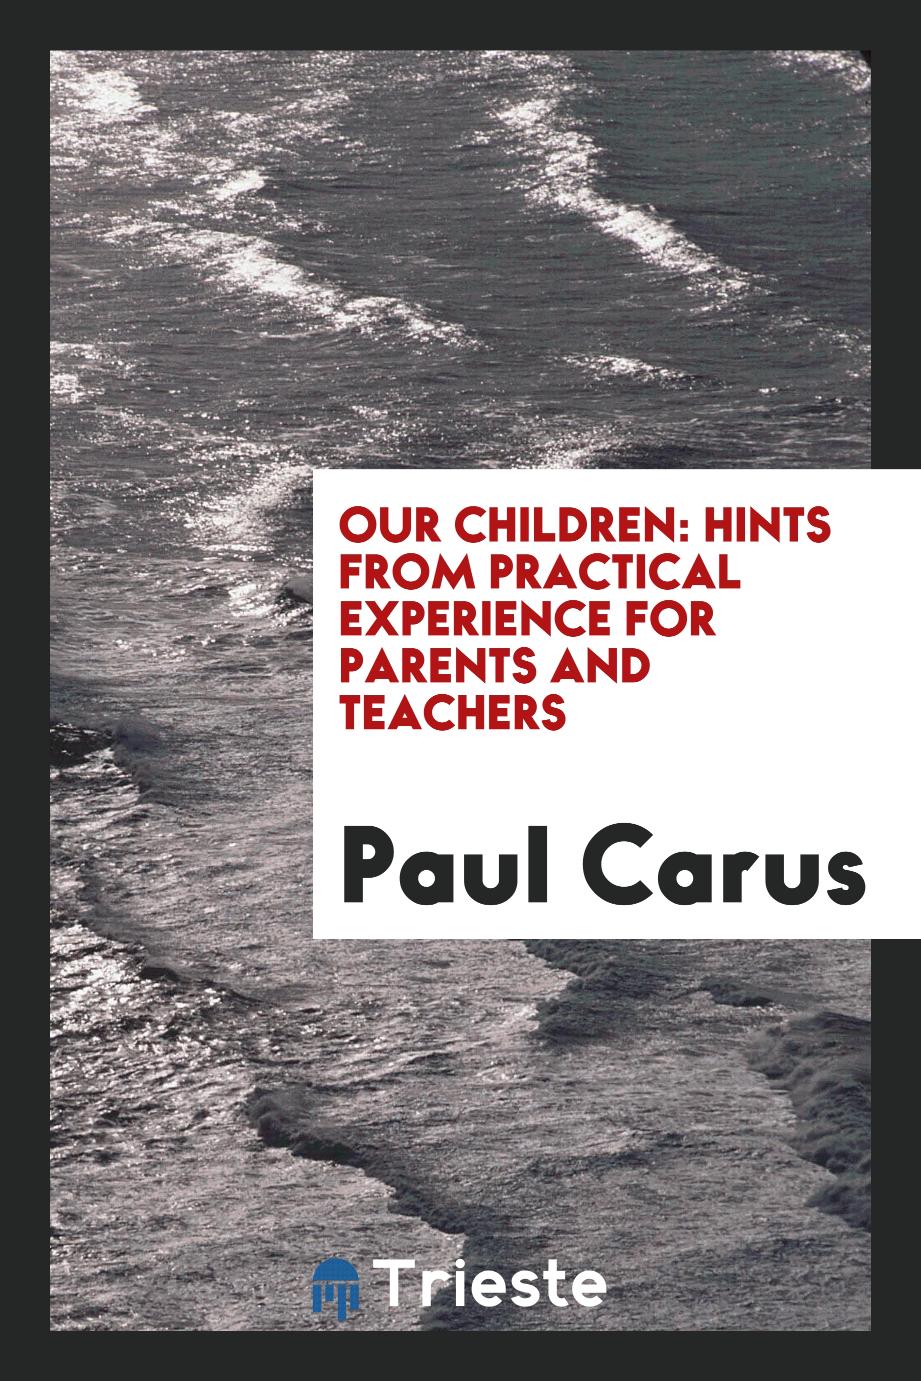 Our children: hints from practical experience for parents and teachers